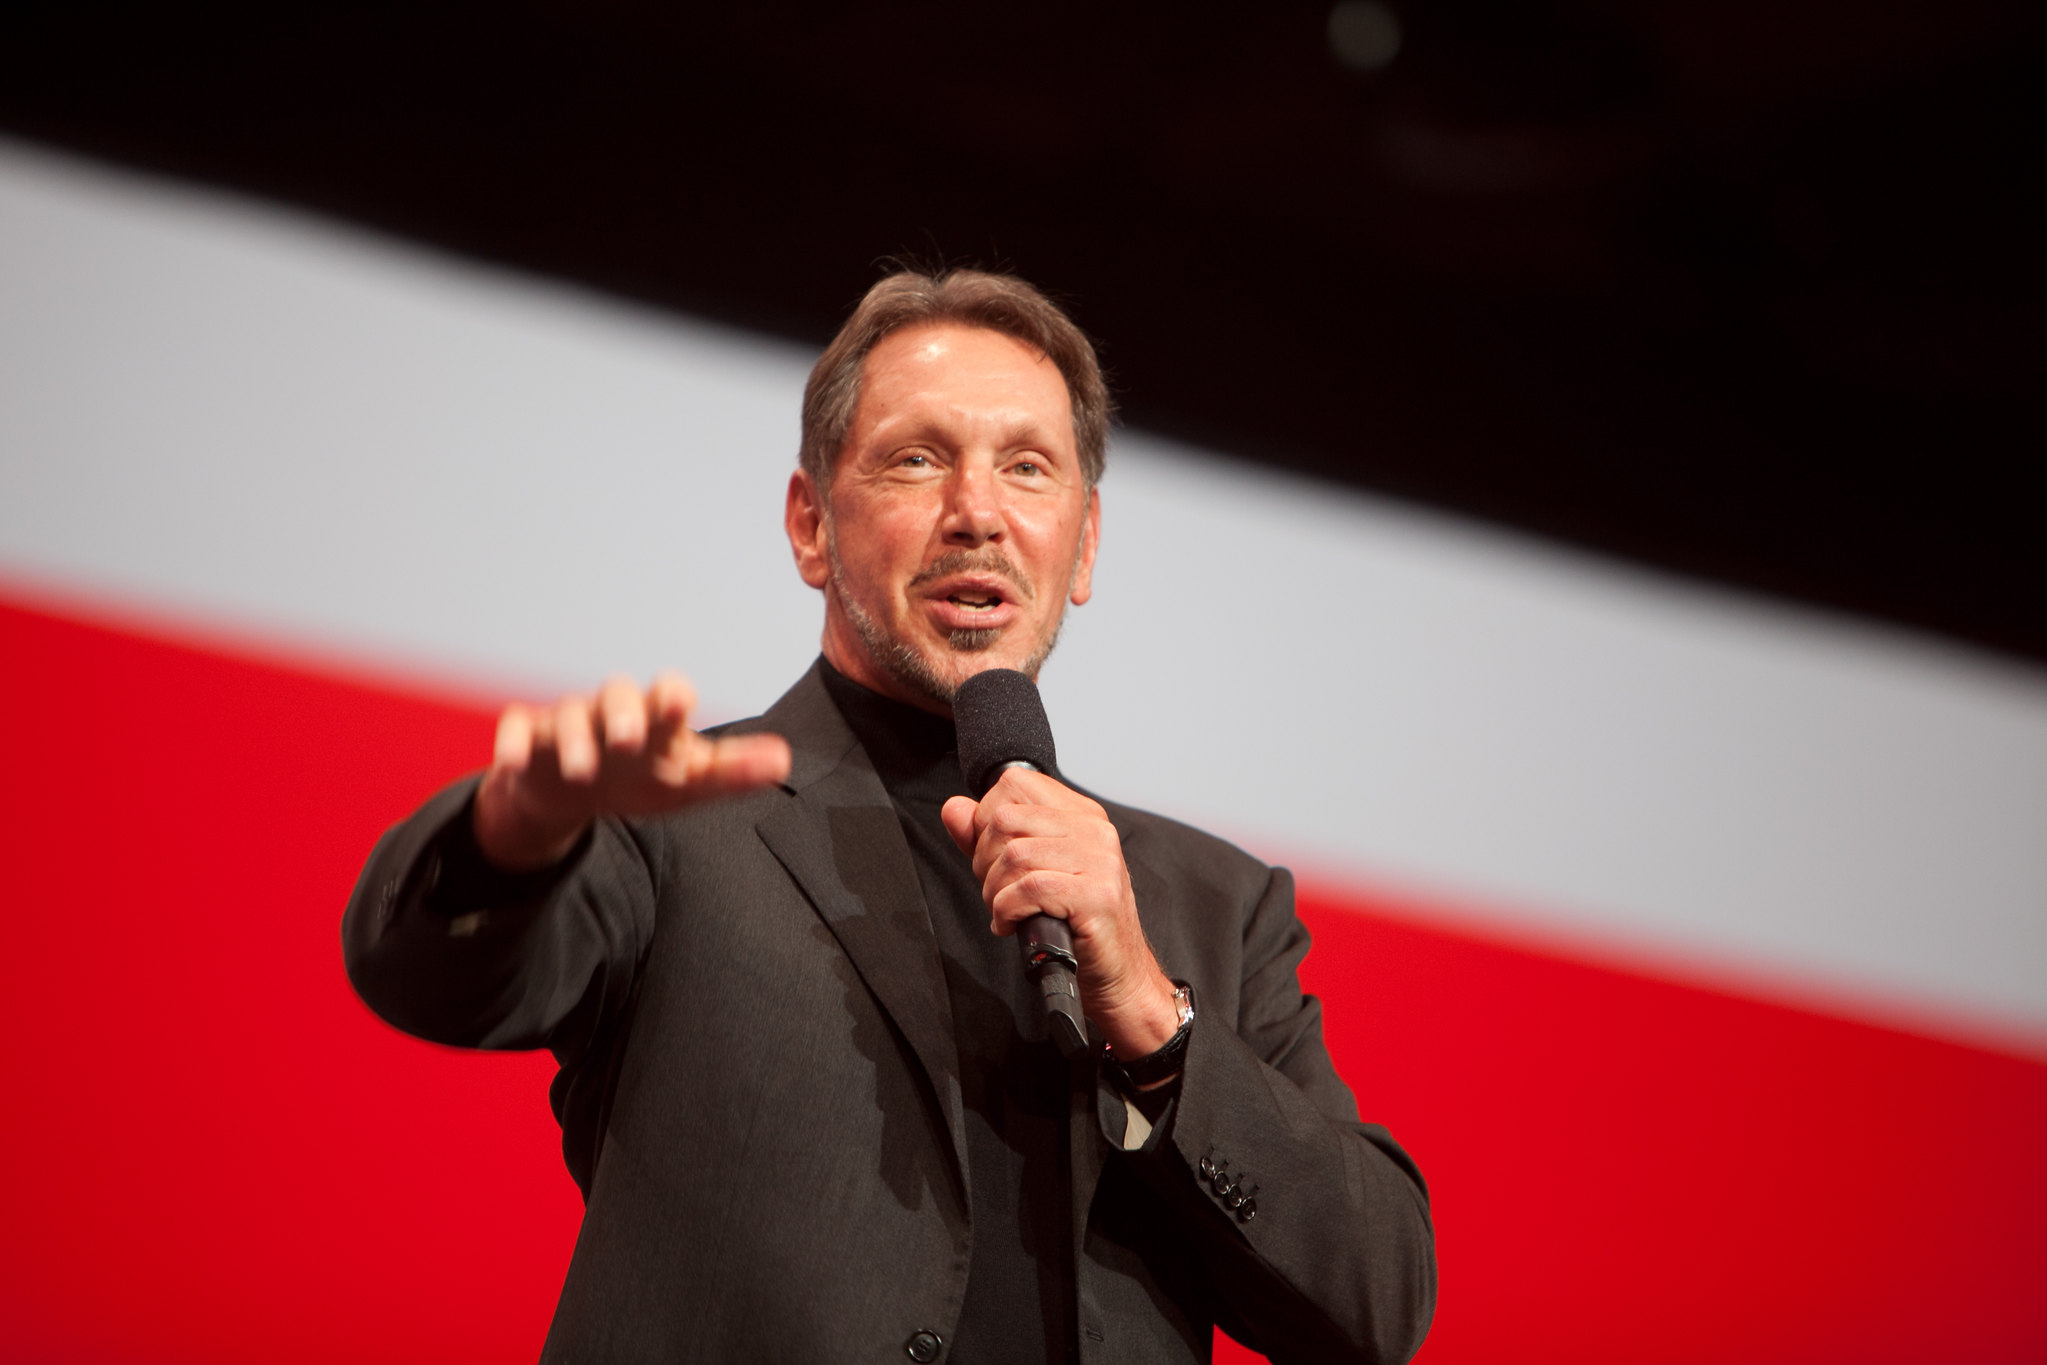 Why Oracle's latest AI deal adds to the stock's buying appeal